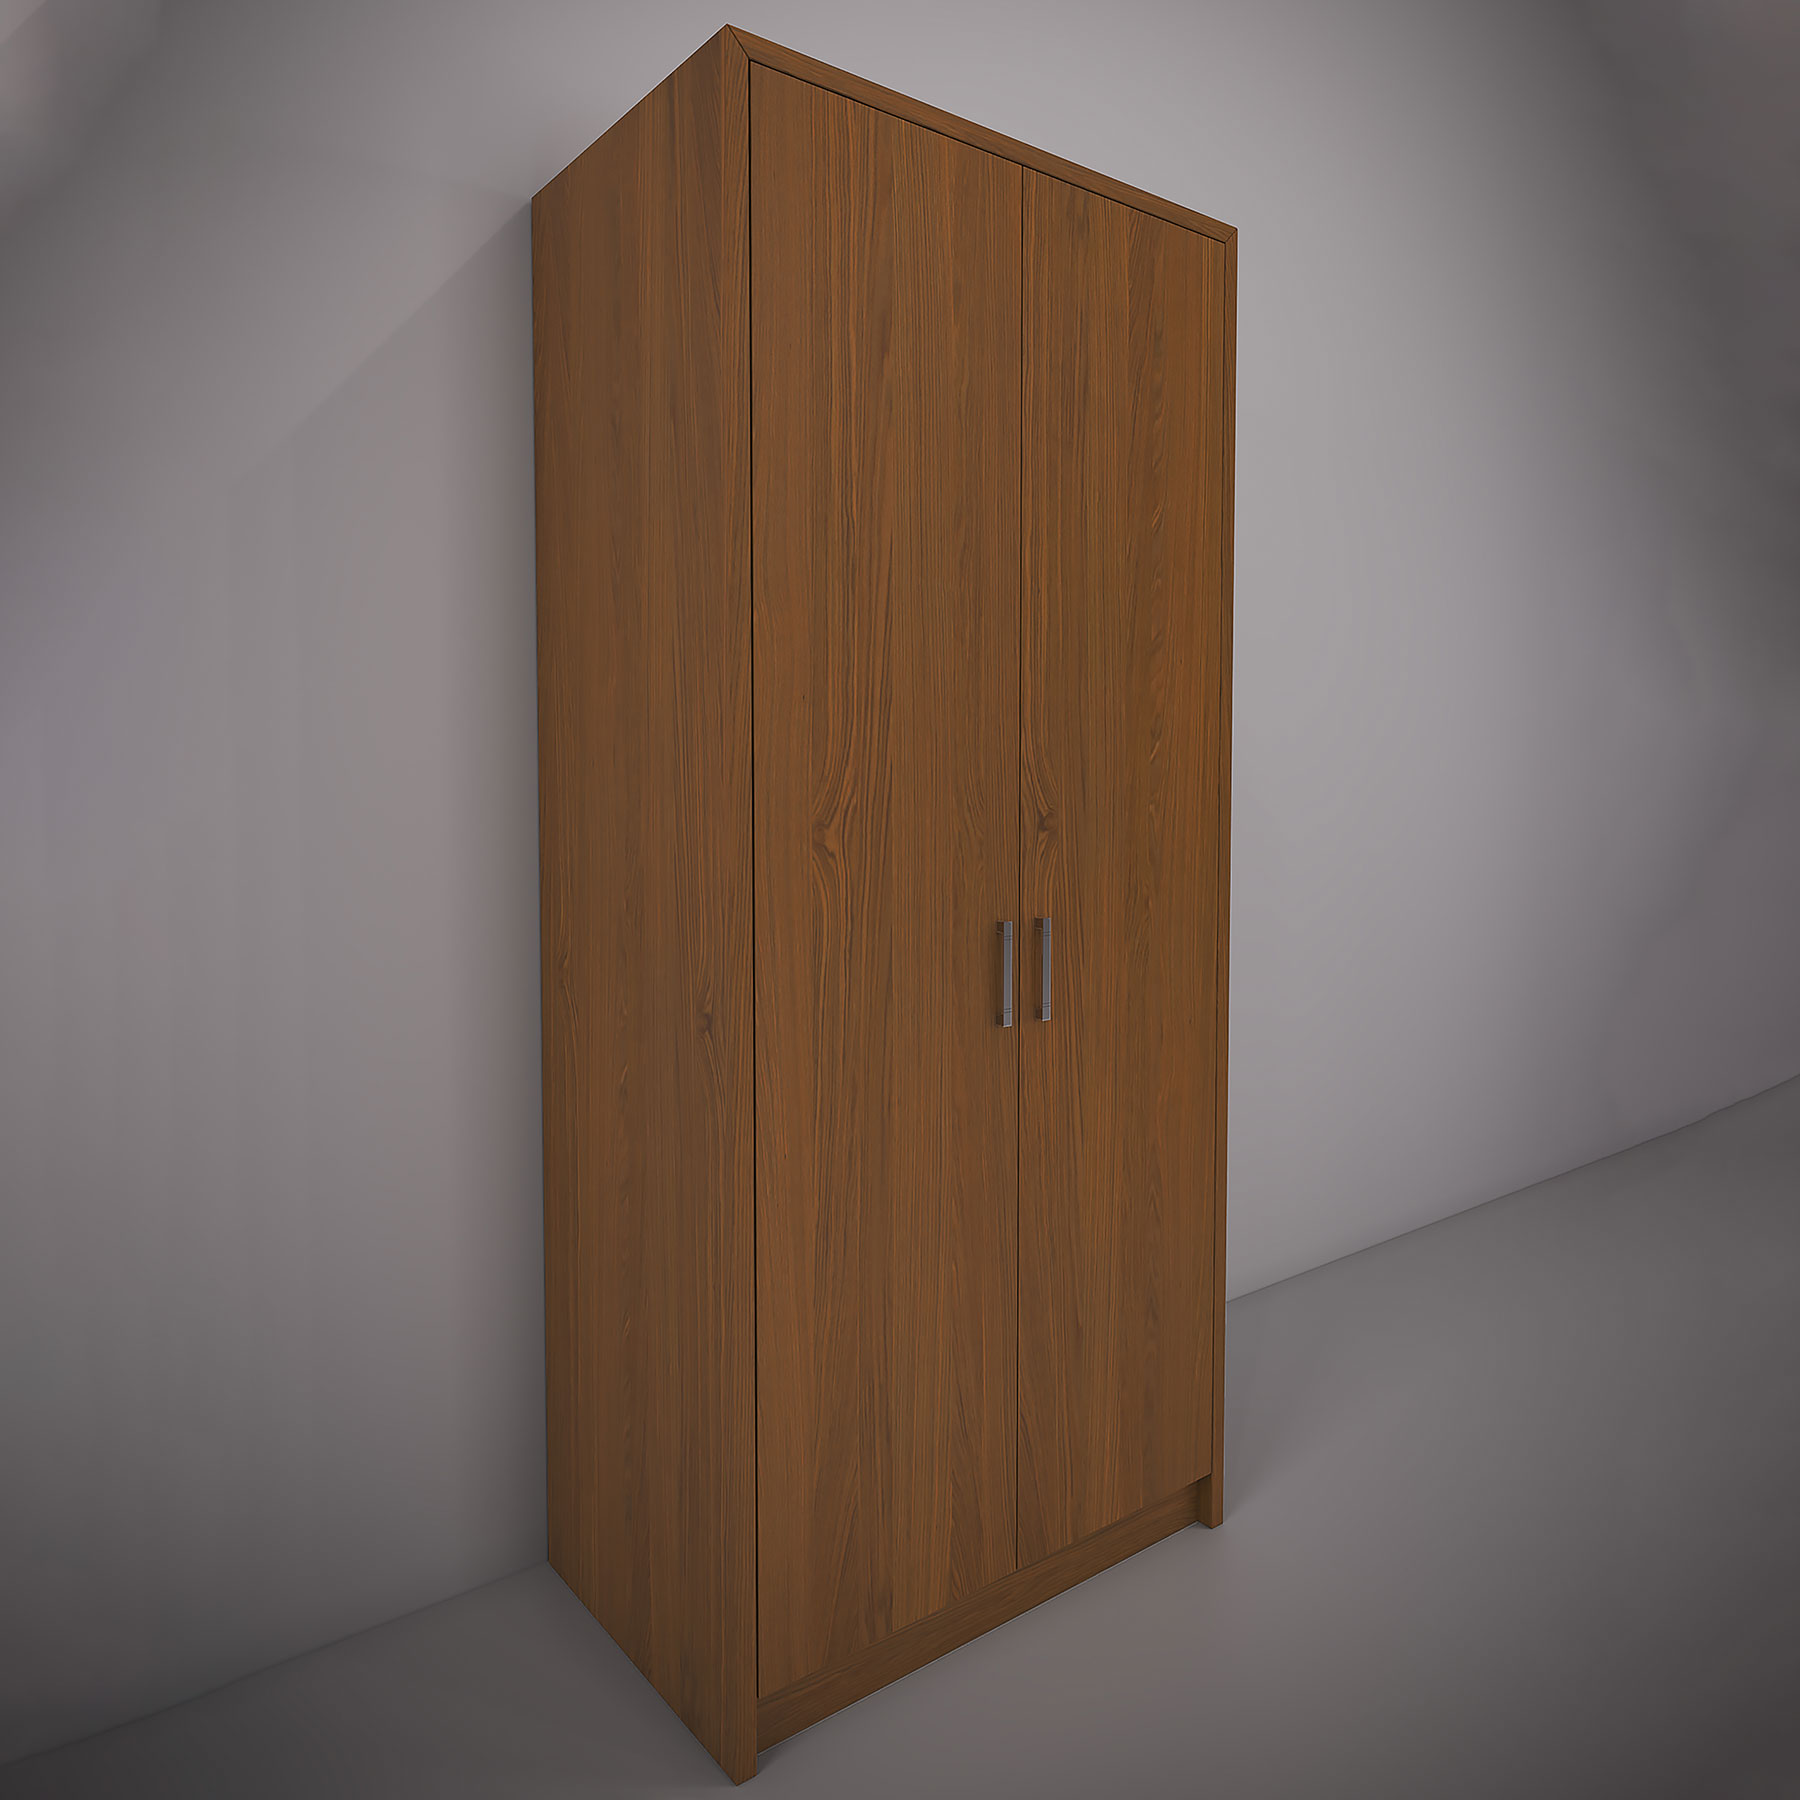 Two-door wardrobe from the Verona collection